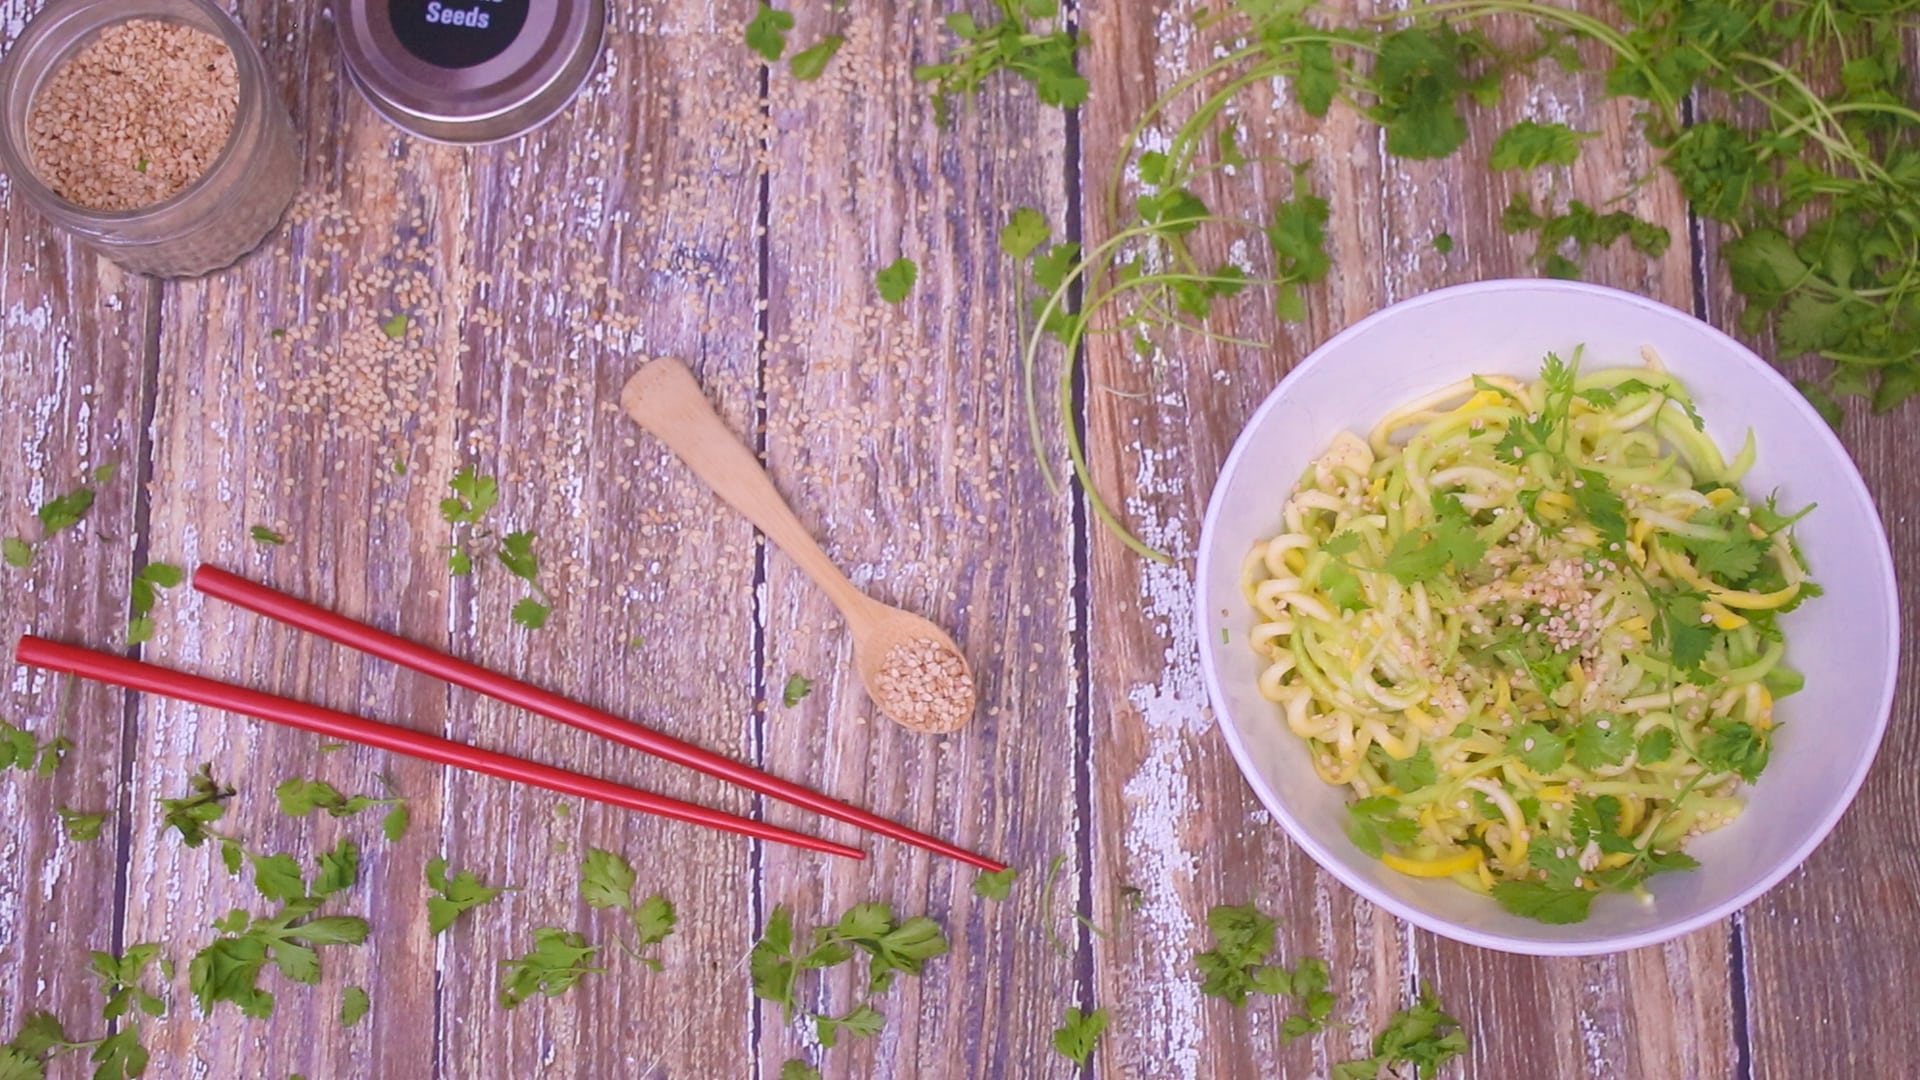 Tease Screen Grab - Cold Cucumber Noodles with Sesame Dressing